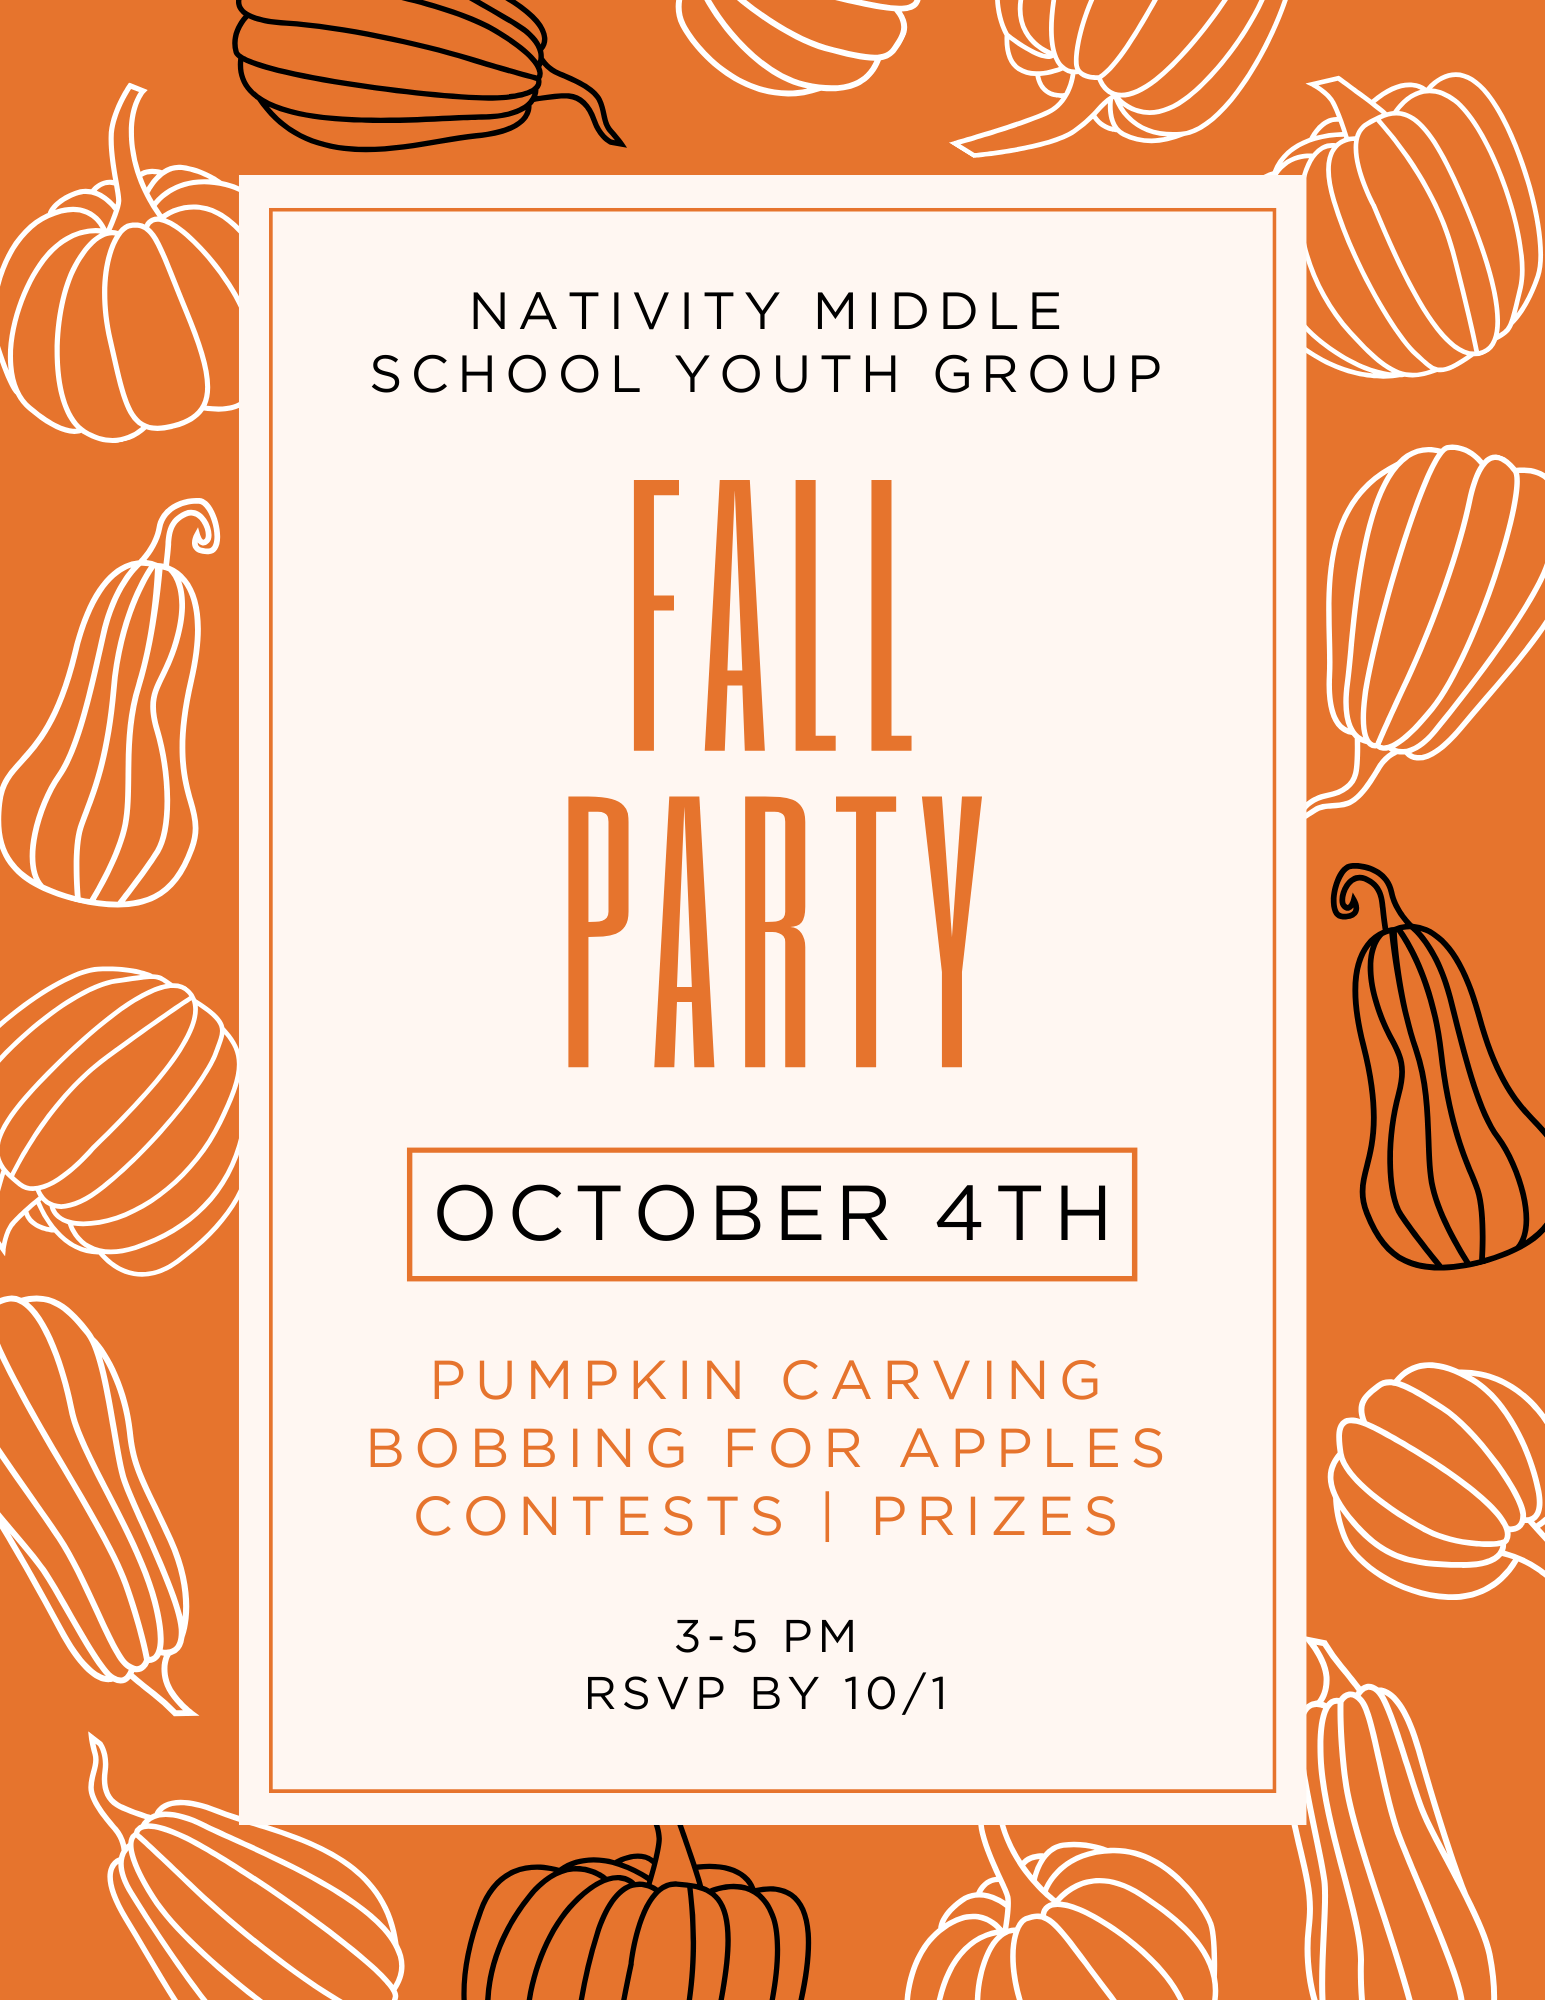 Middle School Youth Group Fall Party